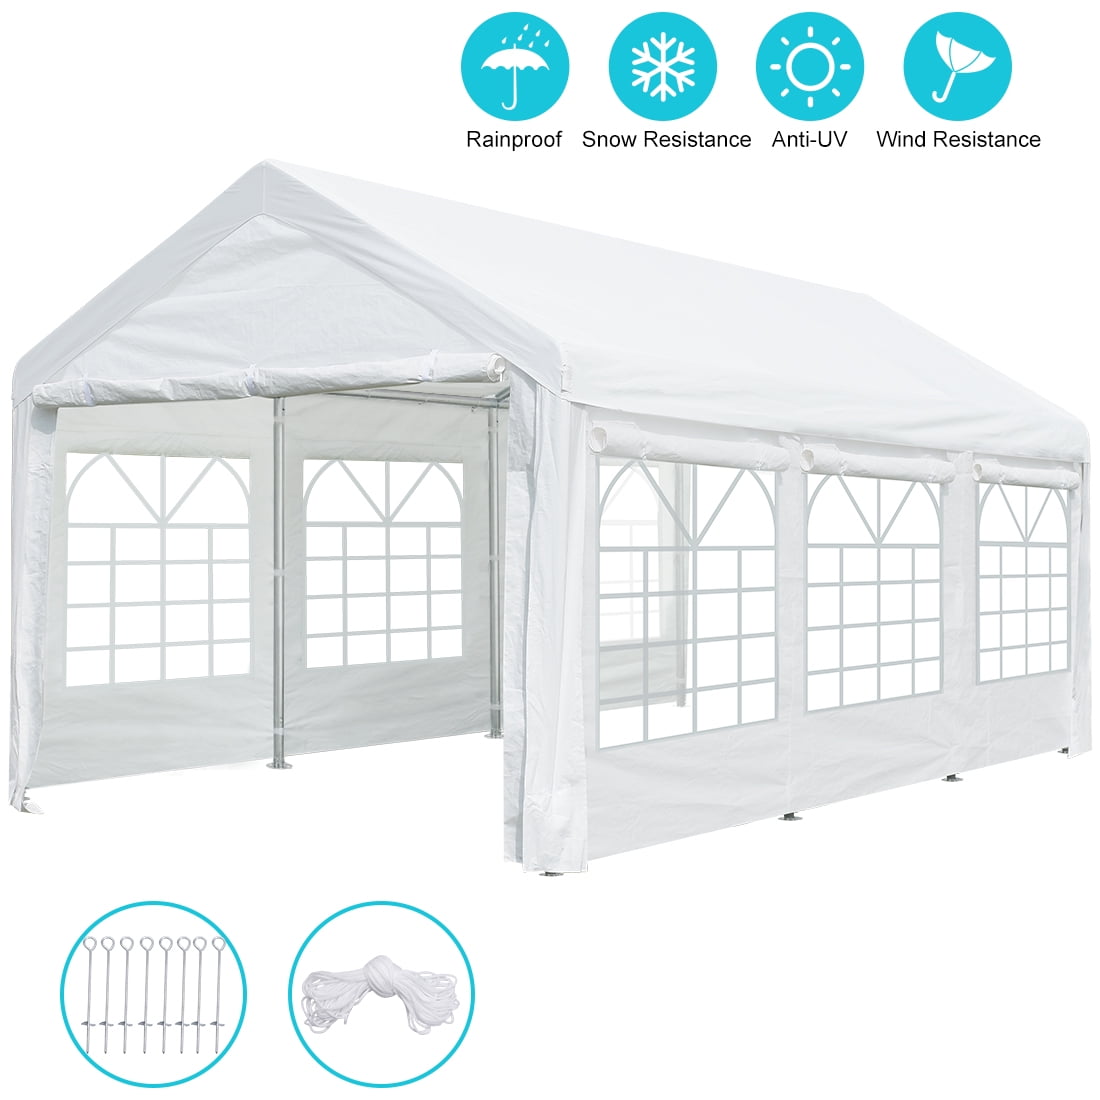 Details about   CARPORT CAR PORT TENT Canopy Shelter 10 x 20 Ft Steel Heavy Duty Frame White 